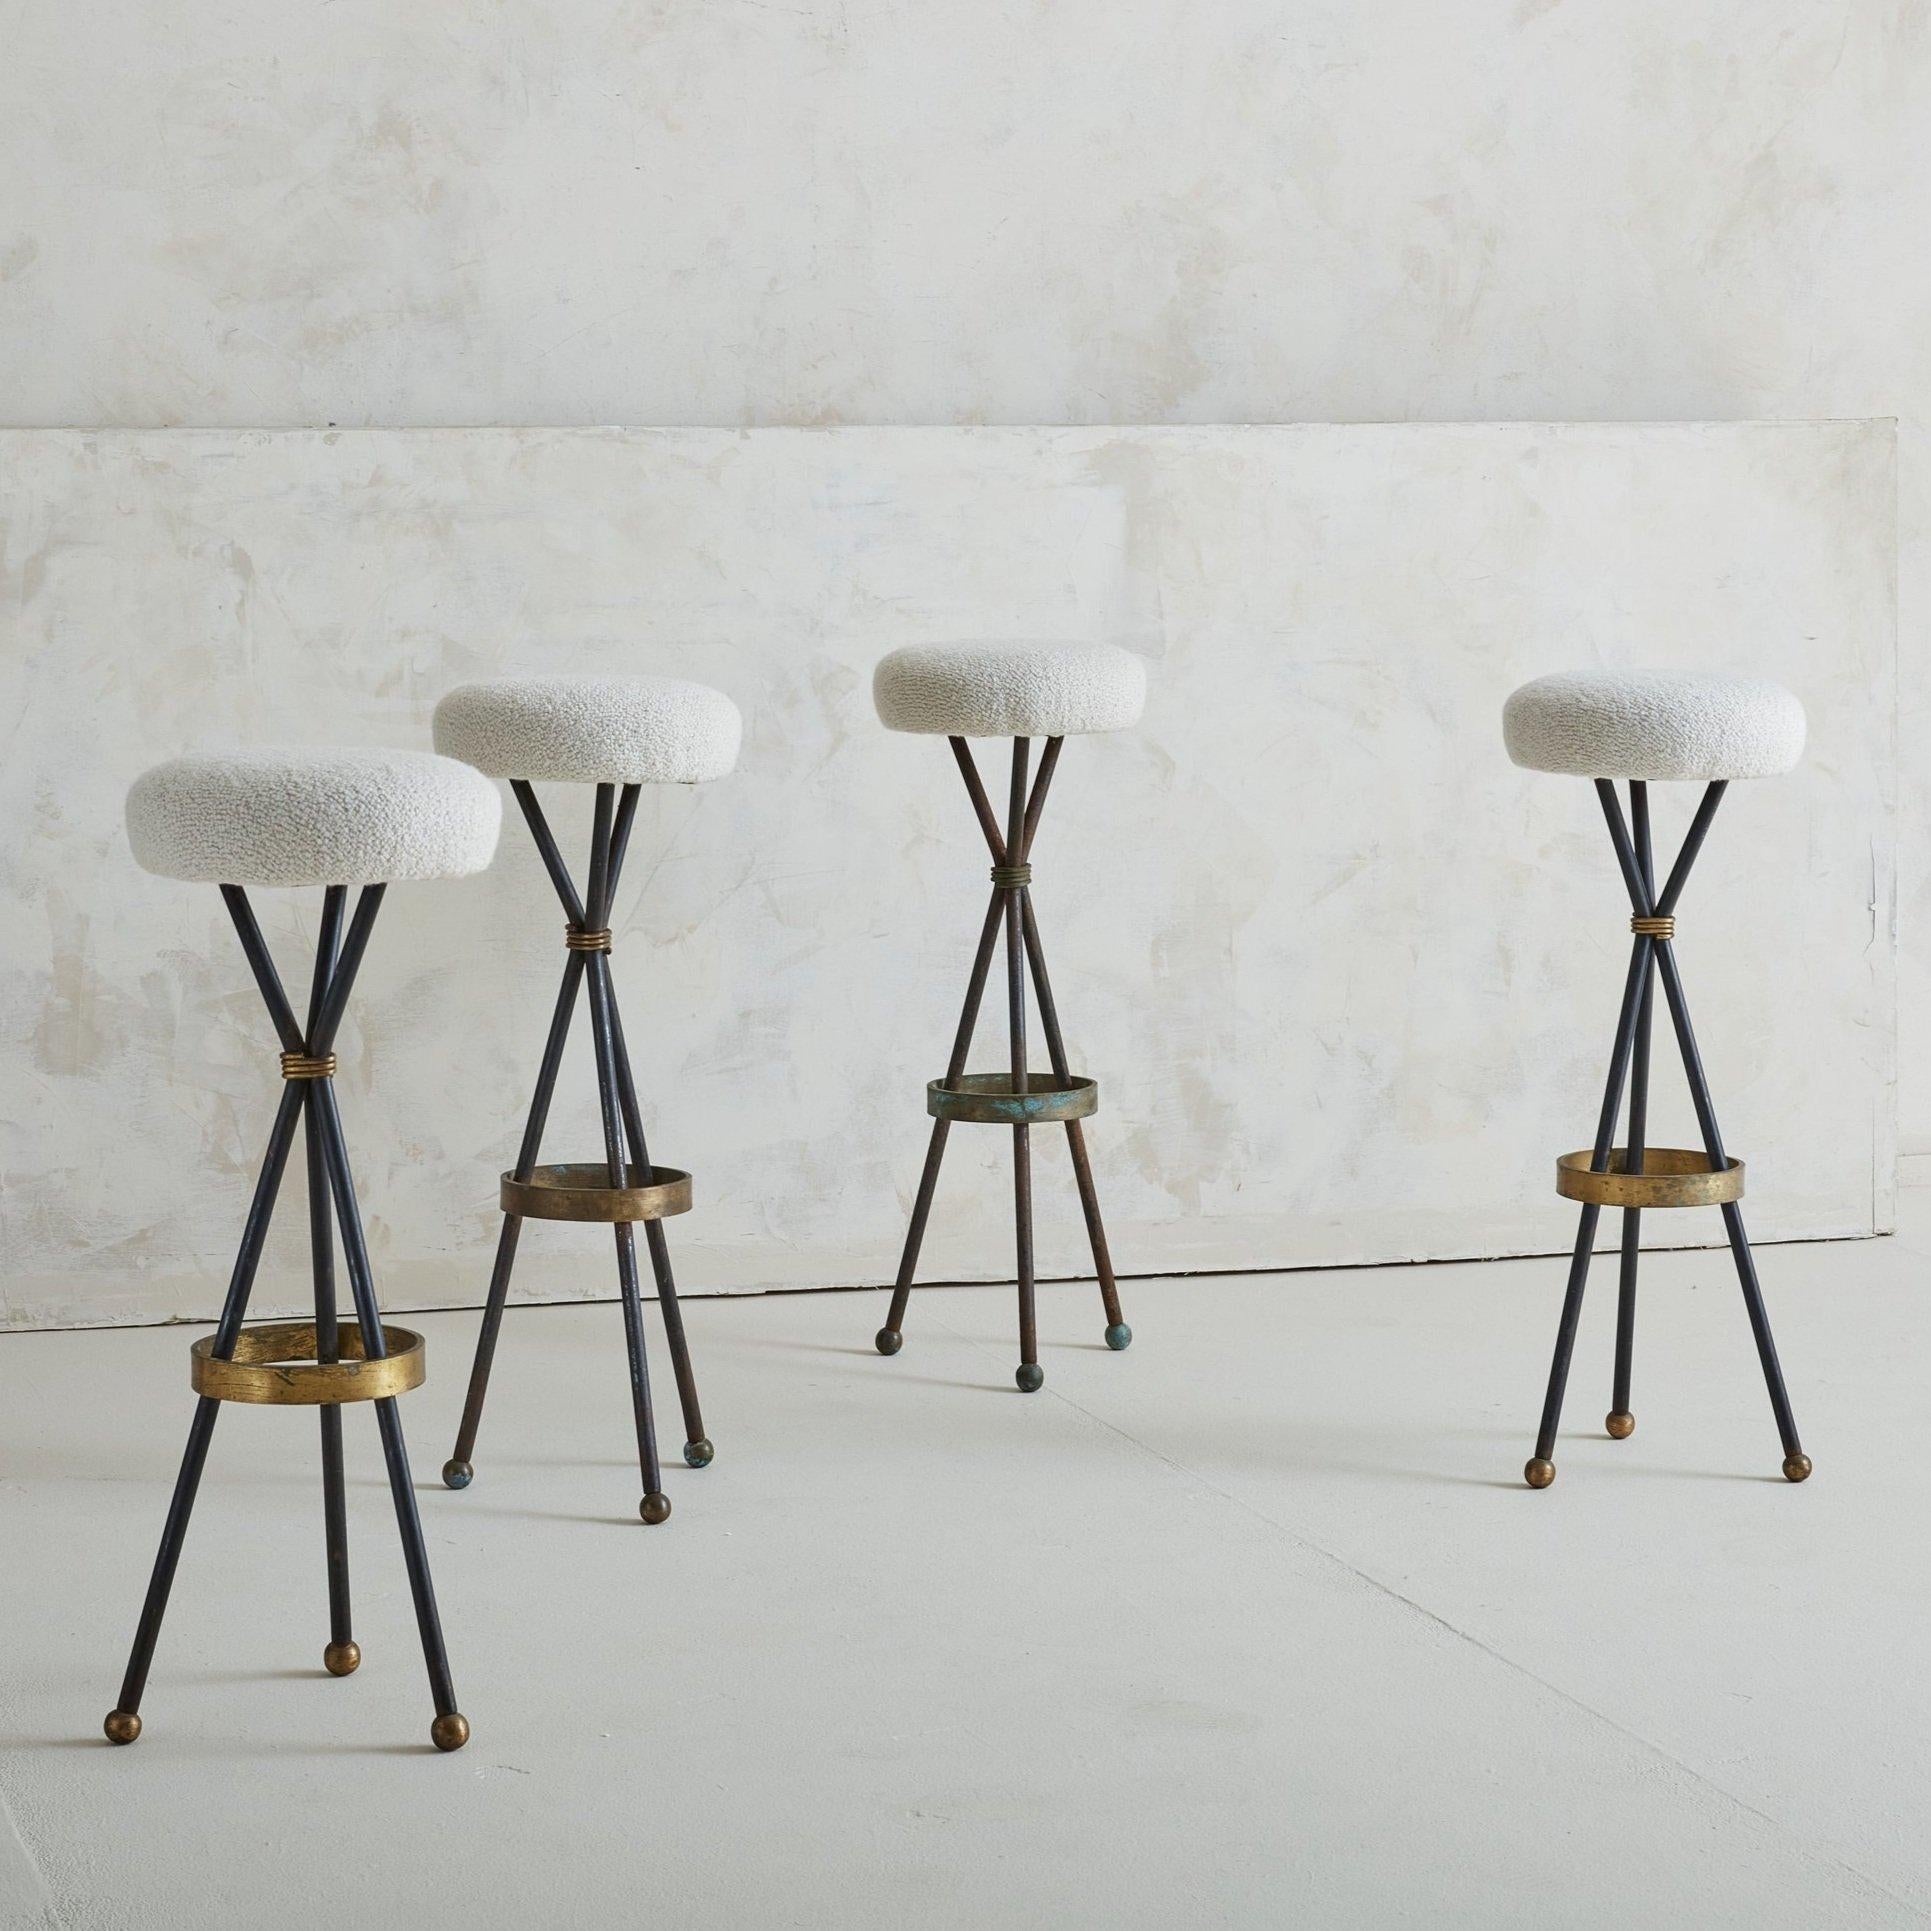 A set of four bistro stools sourced in the South of France. We were delighted to find a full set with such a gorgeous base. The tripod base is made of iron and features a patinated brass ring around the base and brass ball feet. The cushions have